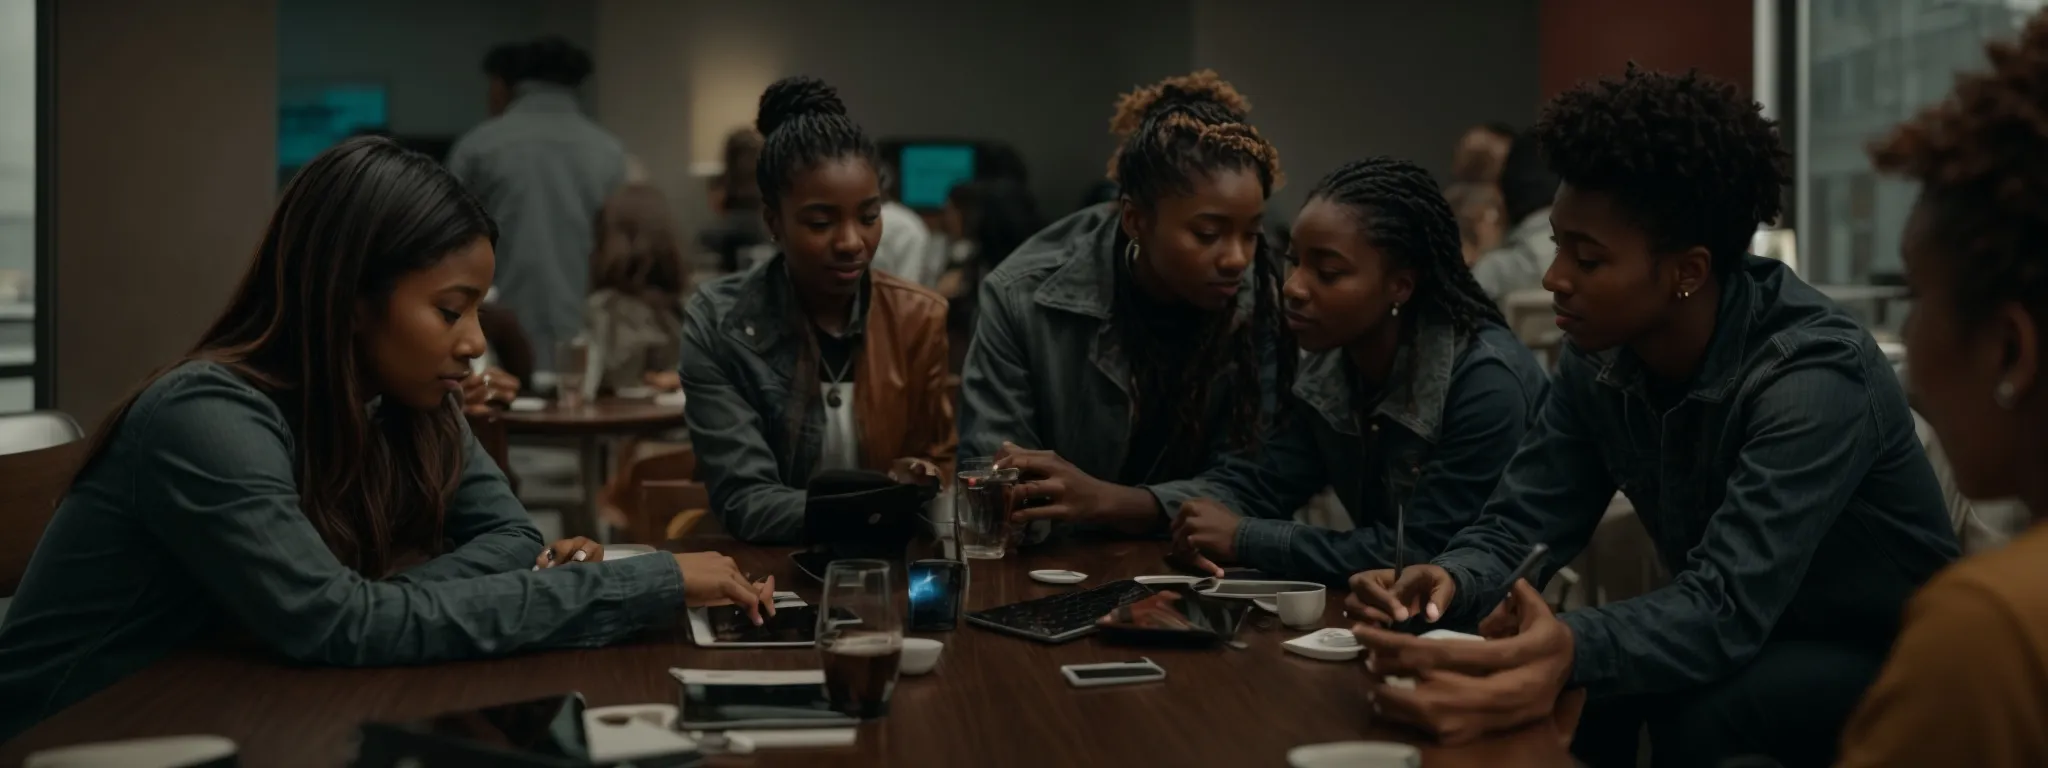 a group of diverse individuals engage in an animated discussion around a table littered with digital devices and marketing materials.